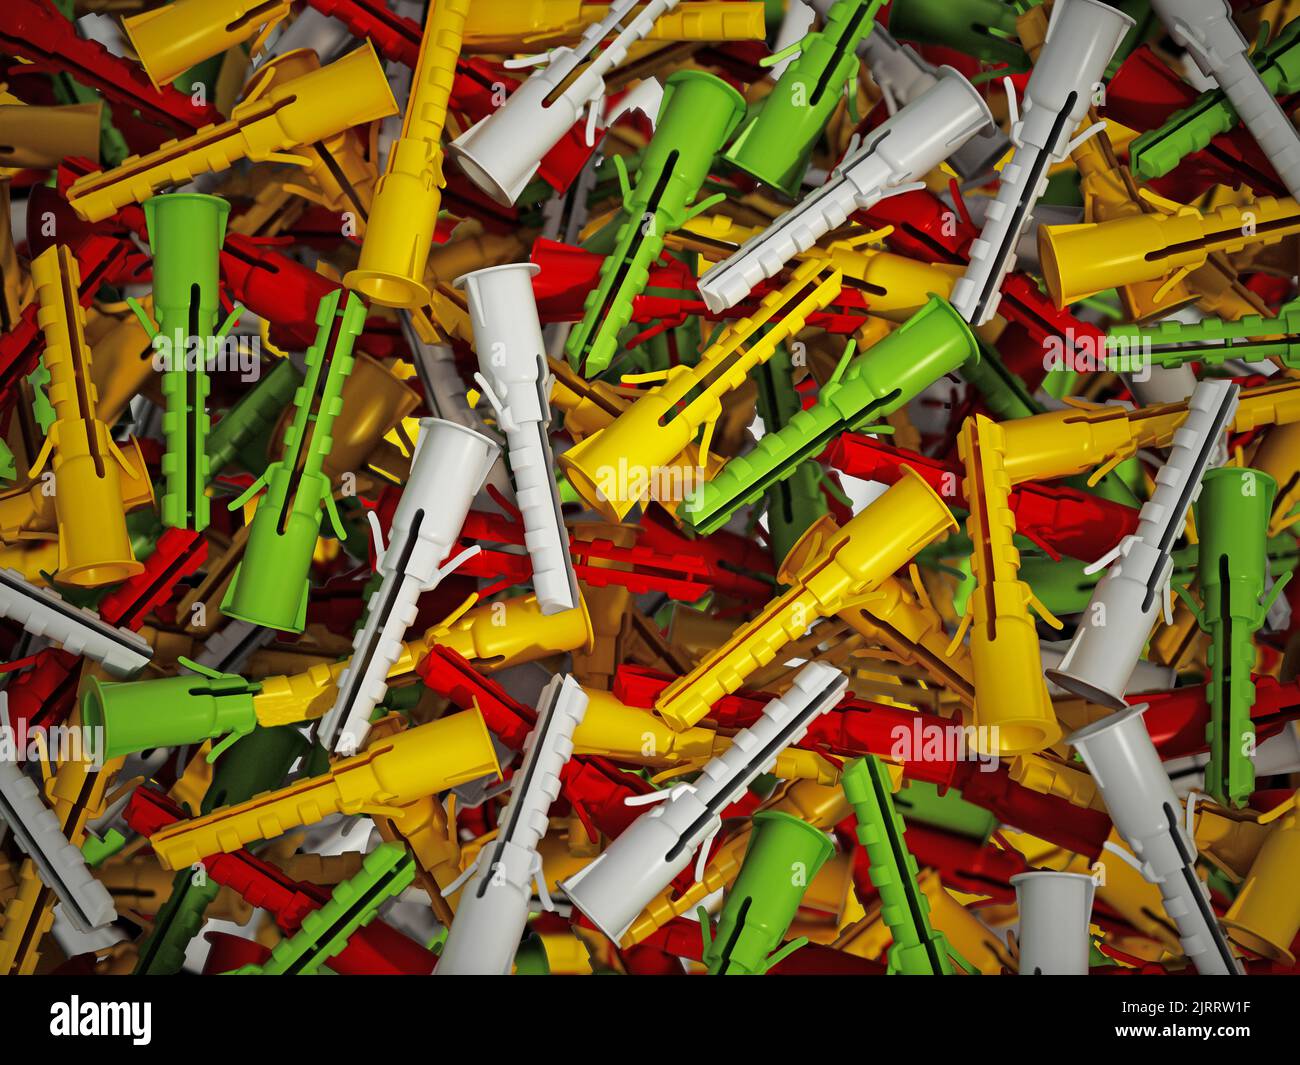 Heap of plastic dowels in various size and colors. 3D illustration. Stock Photo